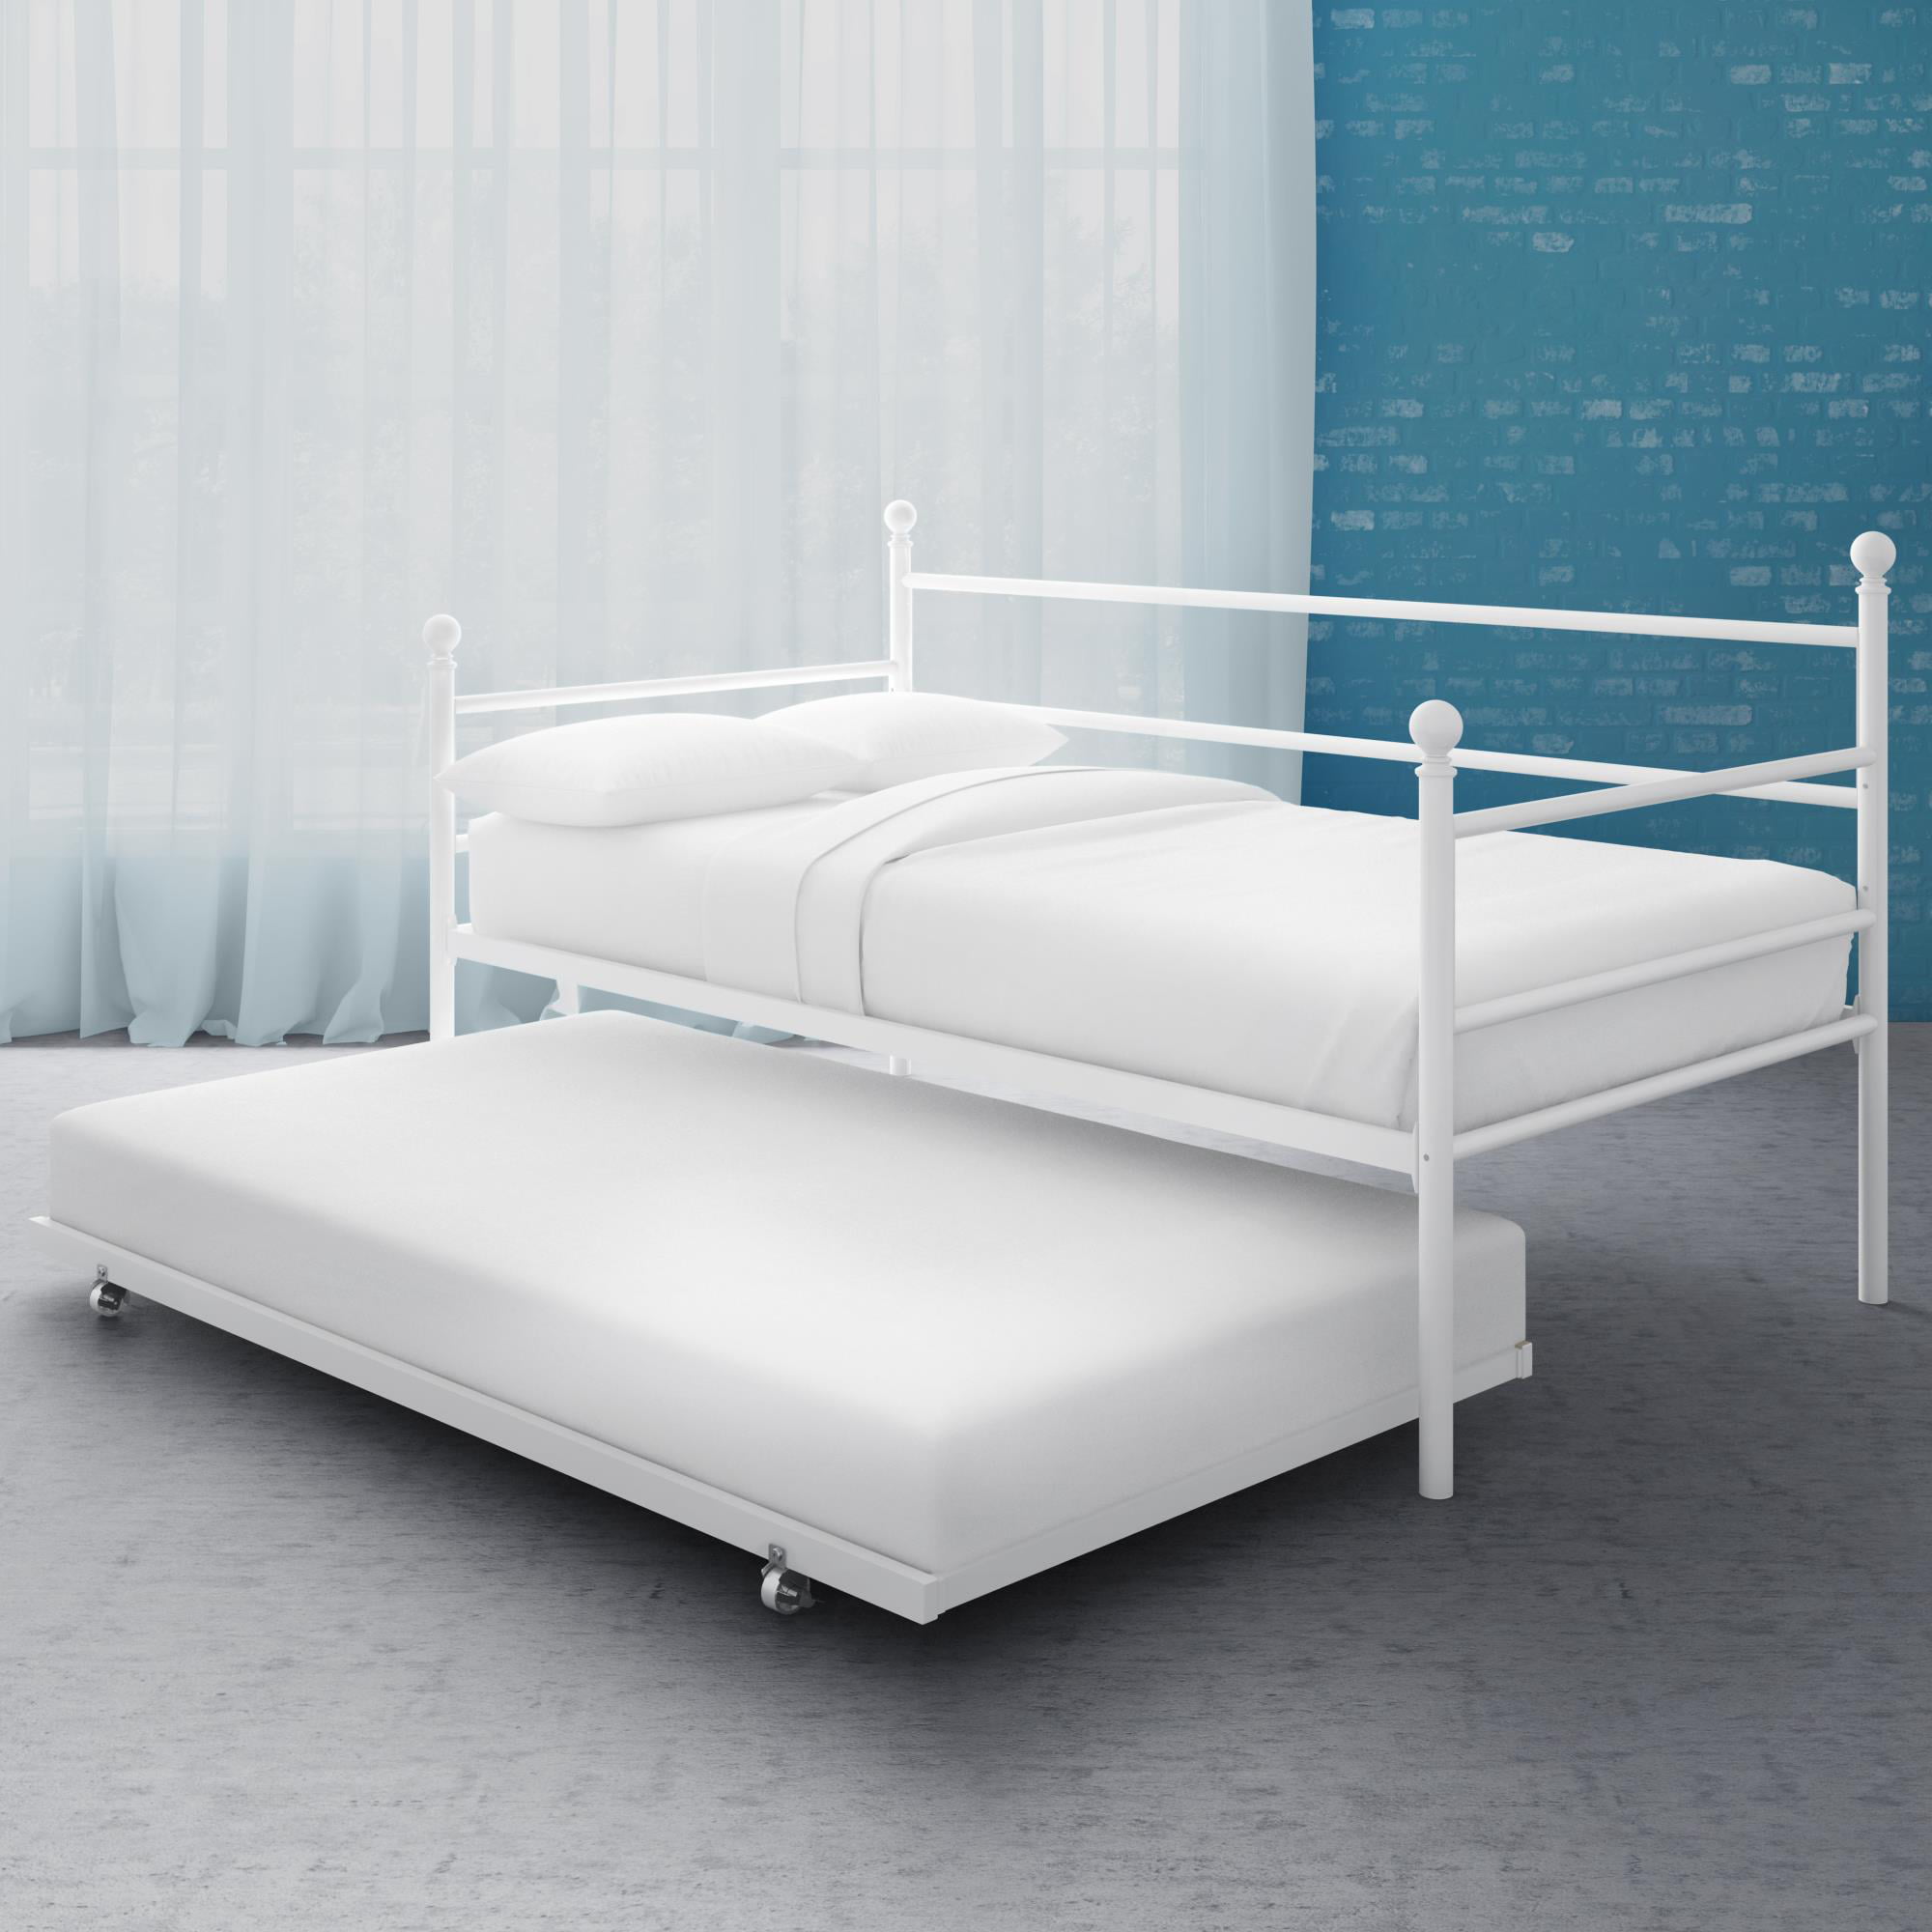 trundle bed mattress height